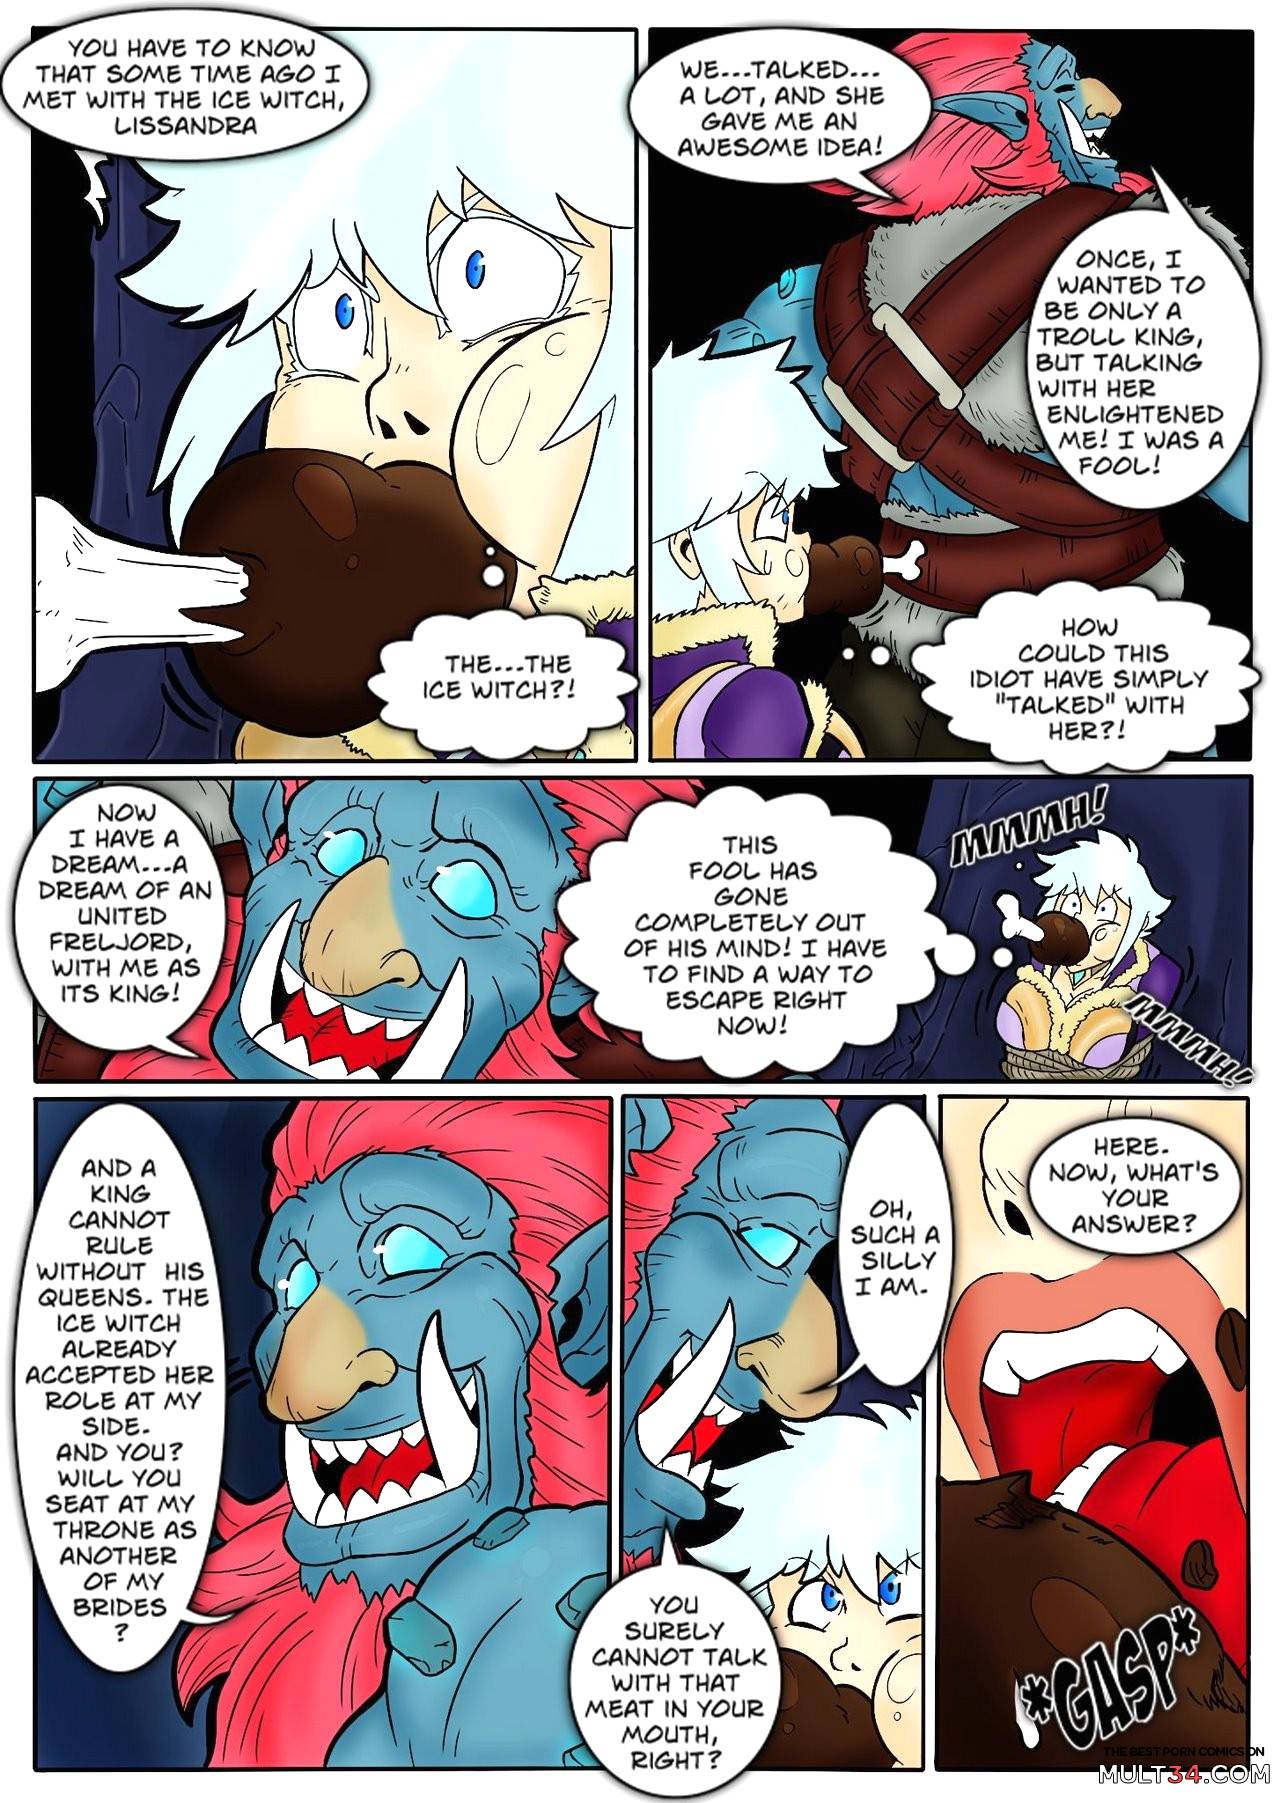 Tales of the Troll King ch. 1 - 3 ] [Colorized] page 23